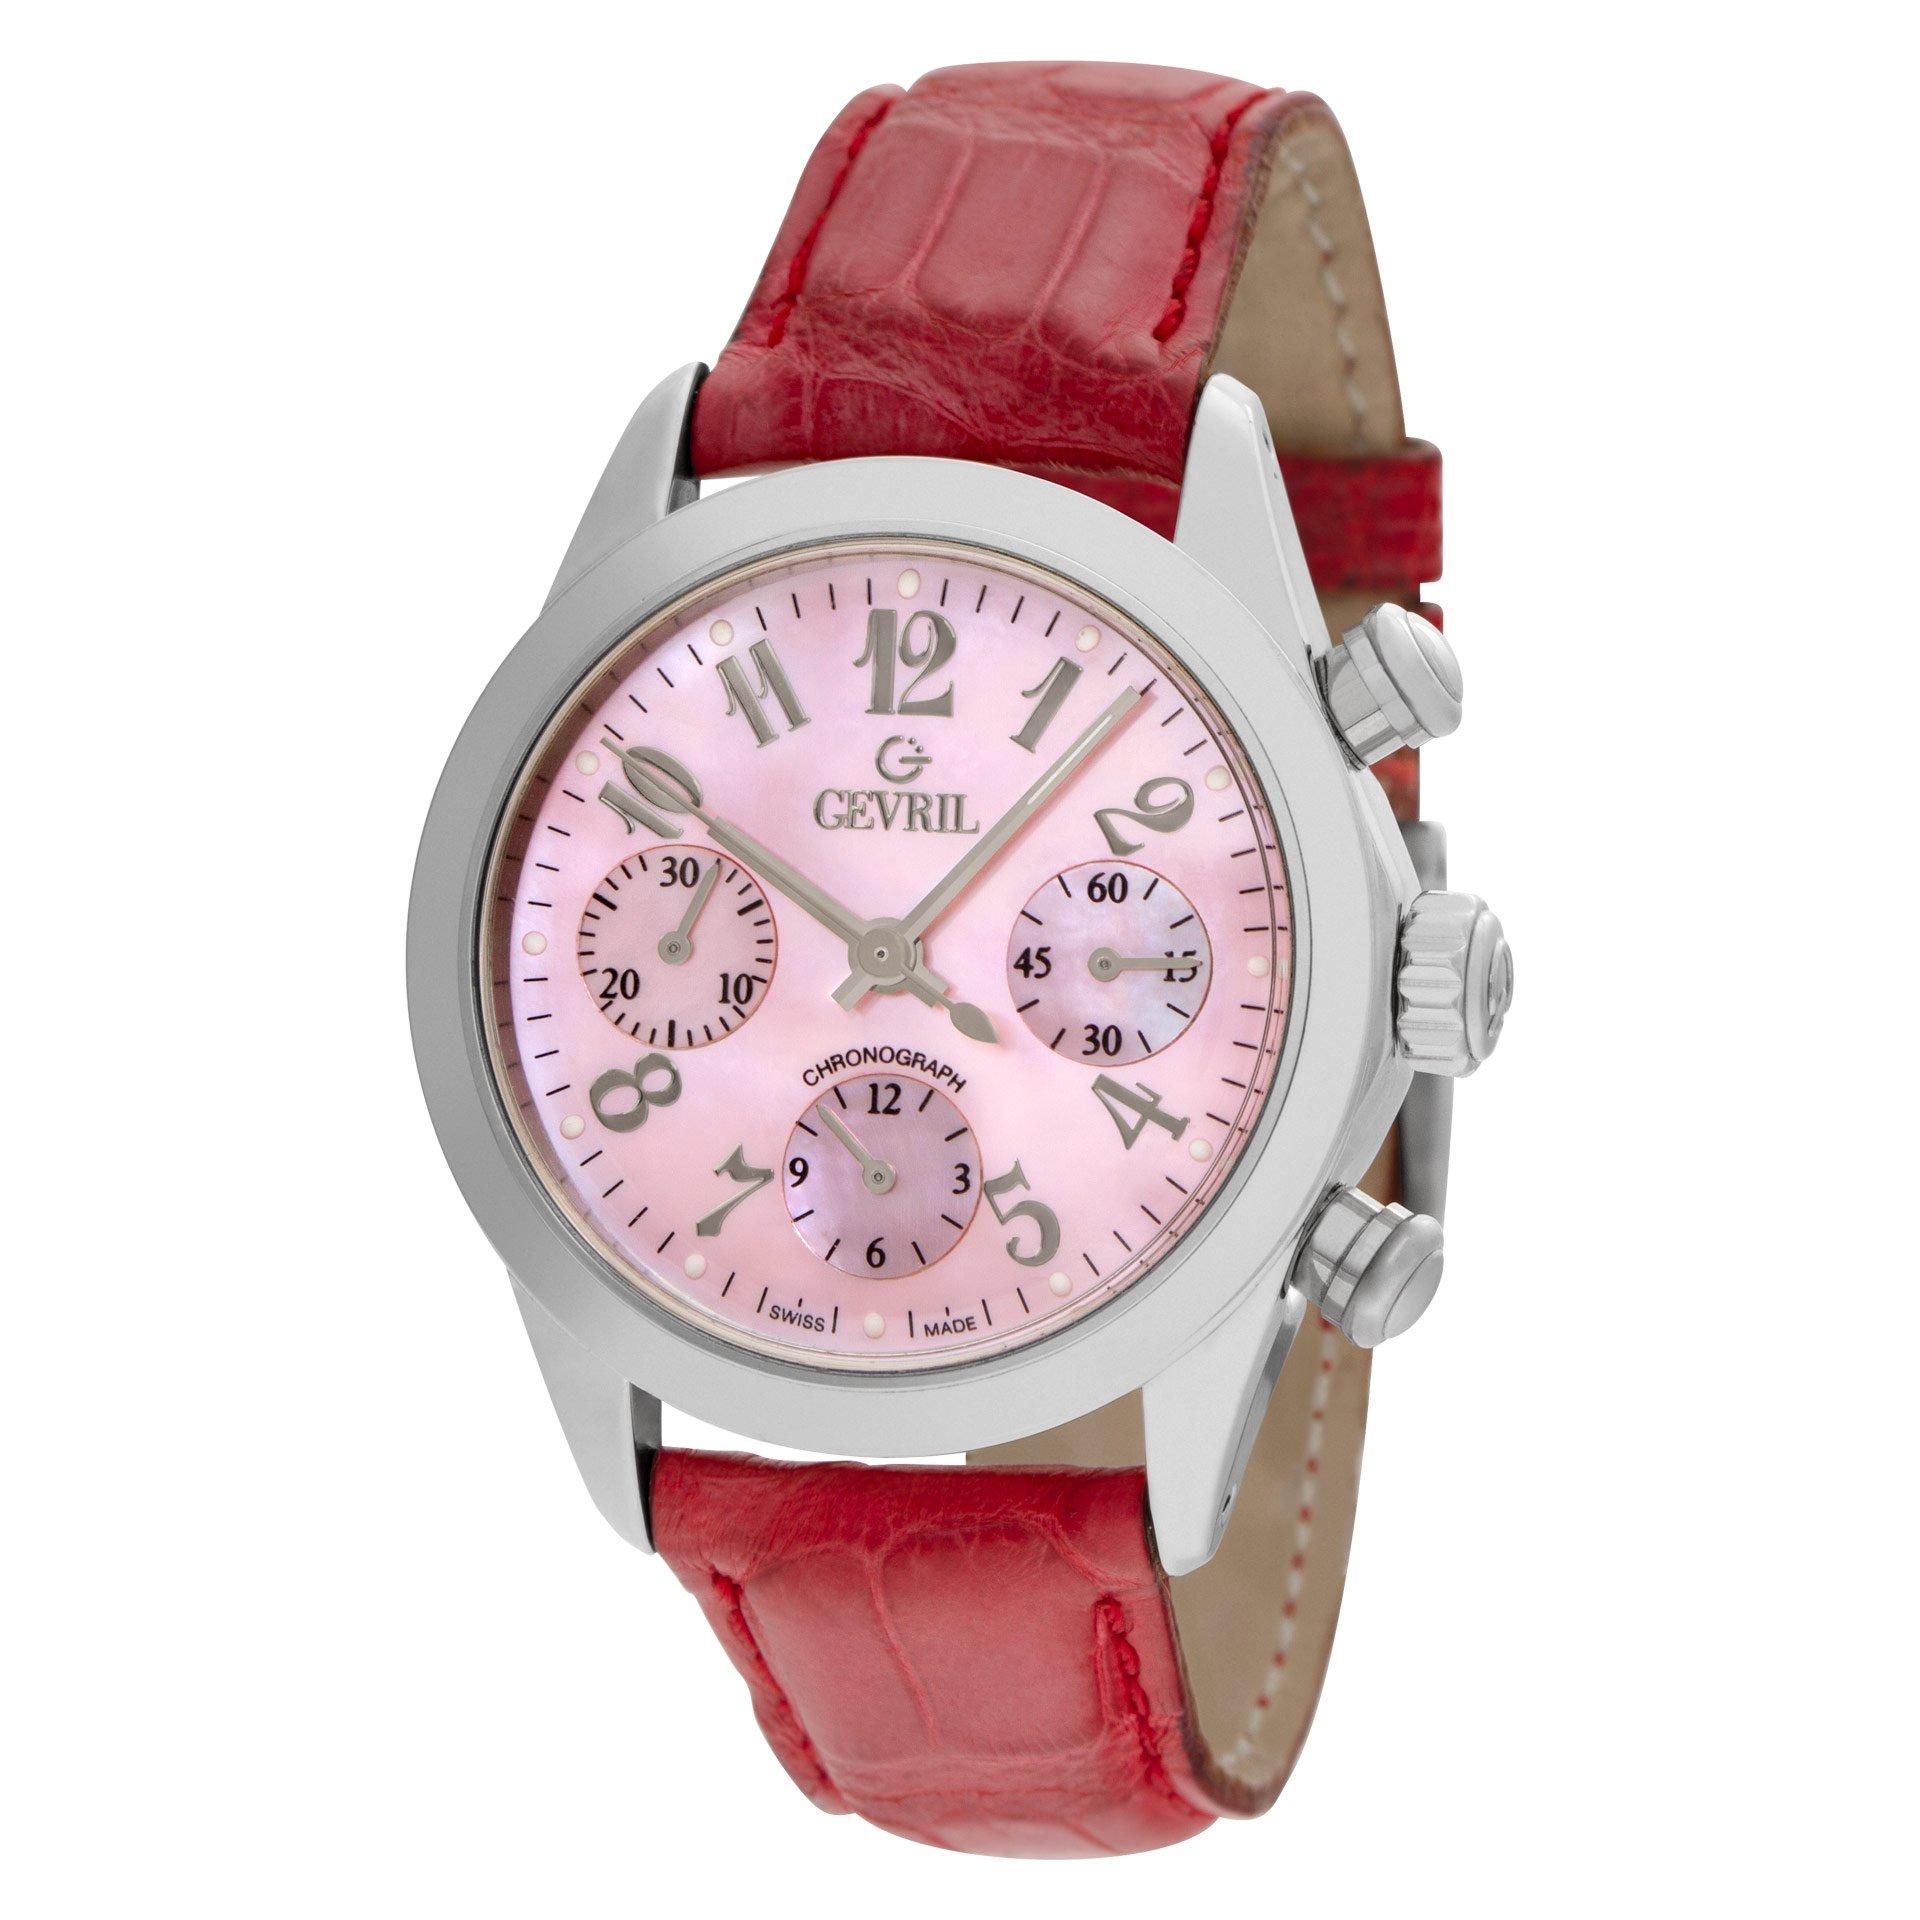 Gevril La Fayette in stainless steel on a crocodile strap. Pink mother of pearl dial. 36mm case size. Auto w/ subseconds and chronograph. Ref 2900. Fine Pre-owned Gevril Watch.

Certified preowned Gevril La Fayette 2900 watch is made out of